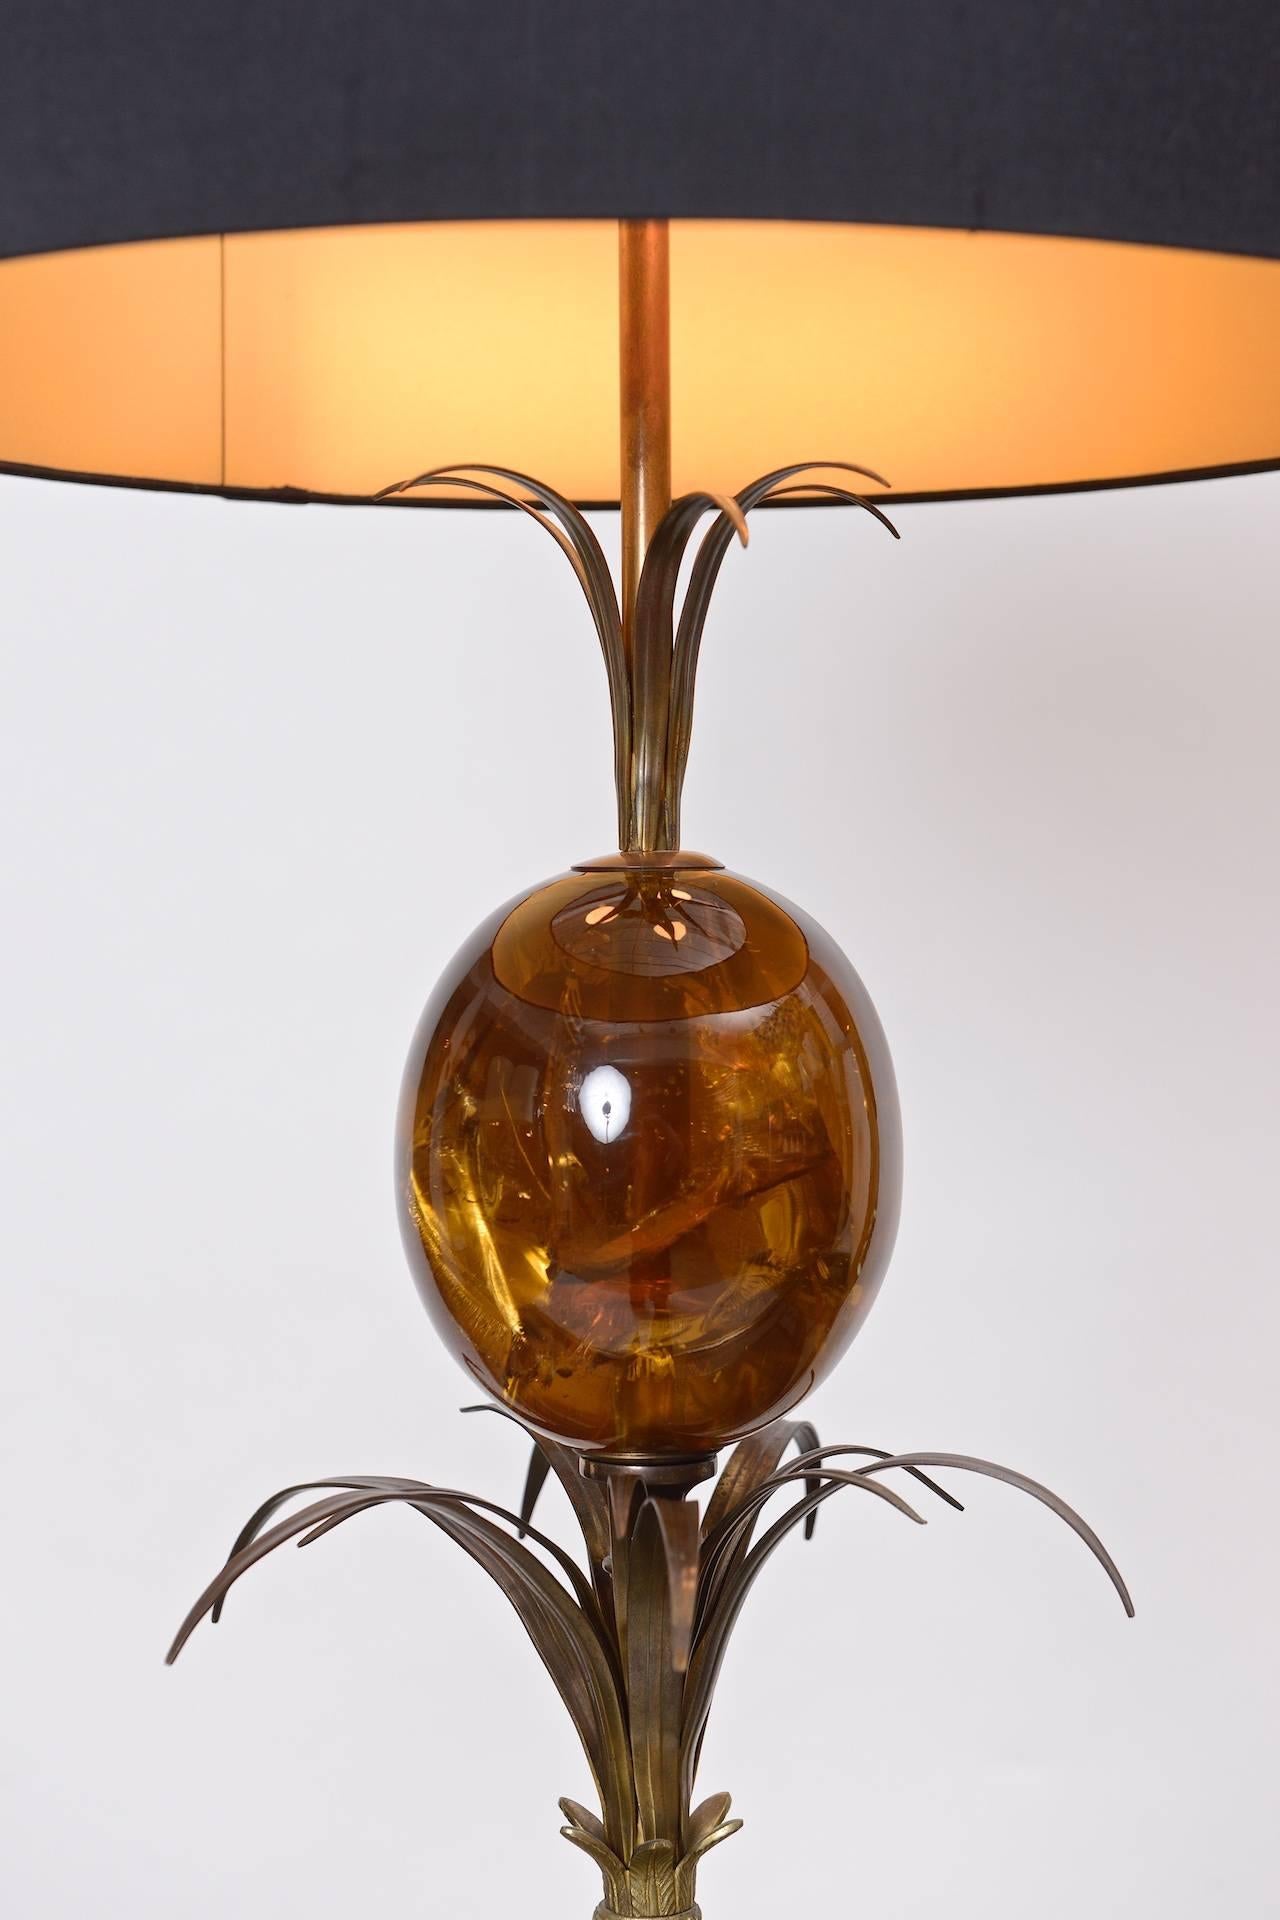 Maison Charles lamp, signed.

Brass, fractured amber resin, fabric shade

Black and gold shade.